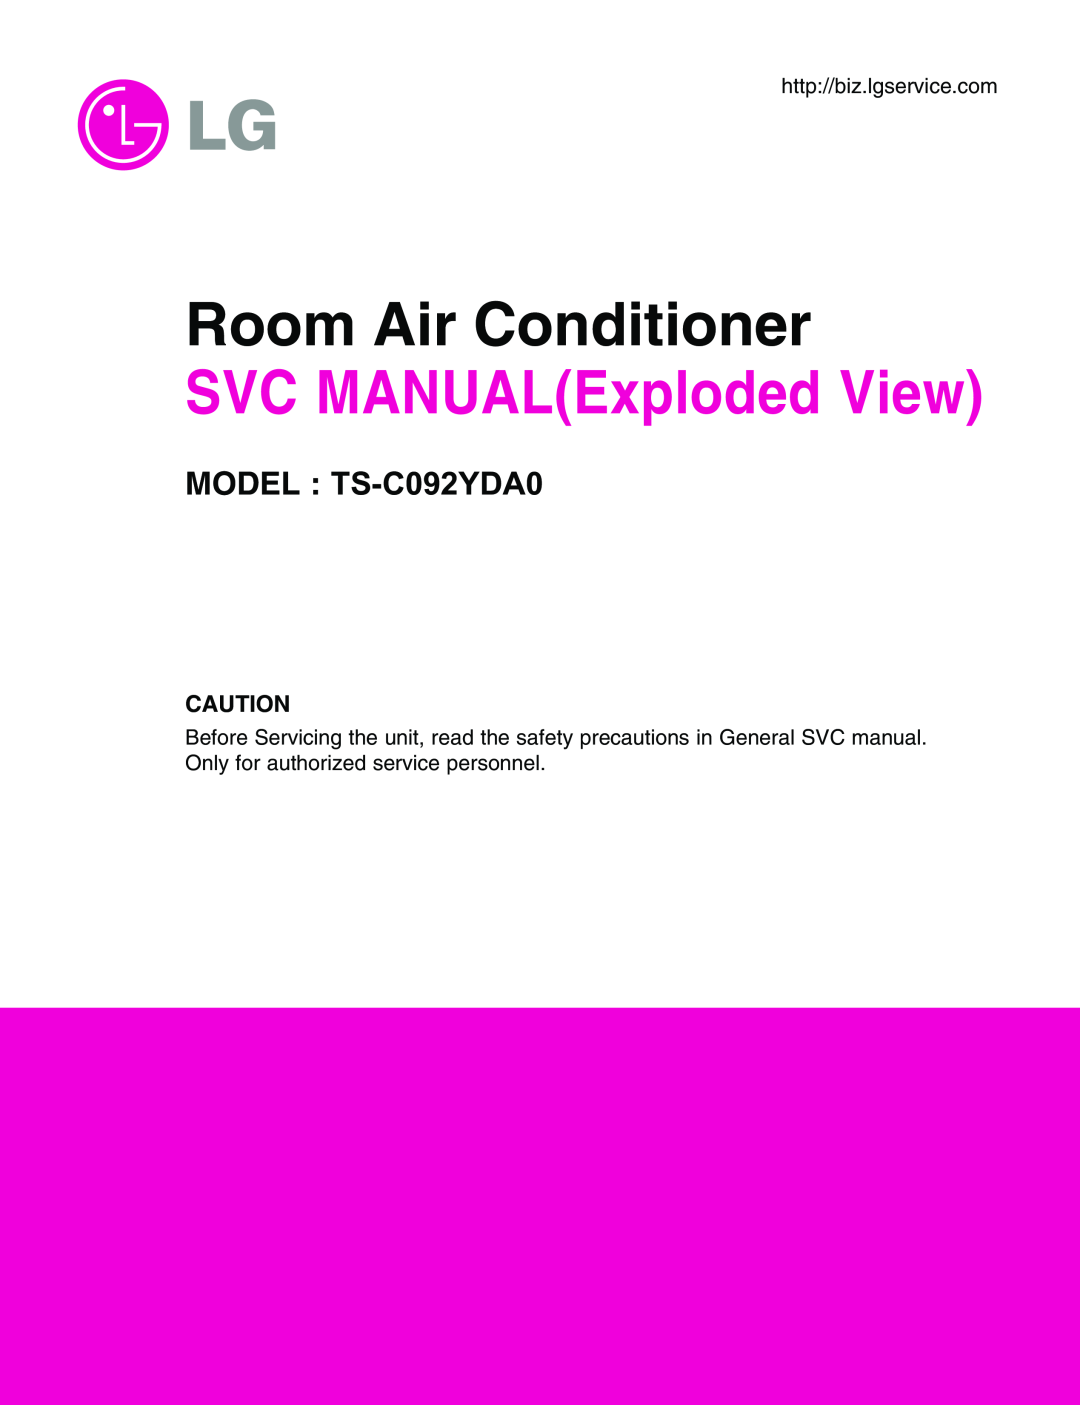 LG Electronics manual Room Air Conditioner, SVC MANUALExploded View, MODEL TS-C092YDA0, http//biz.lgservice.com 